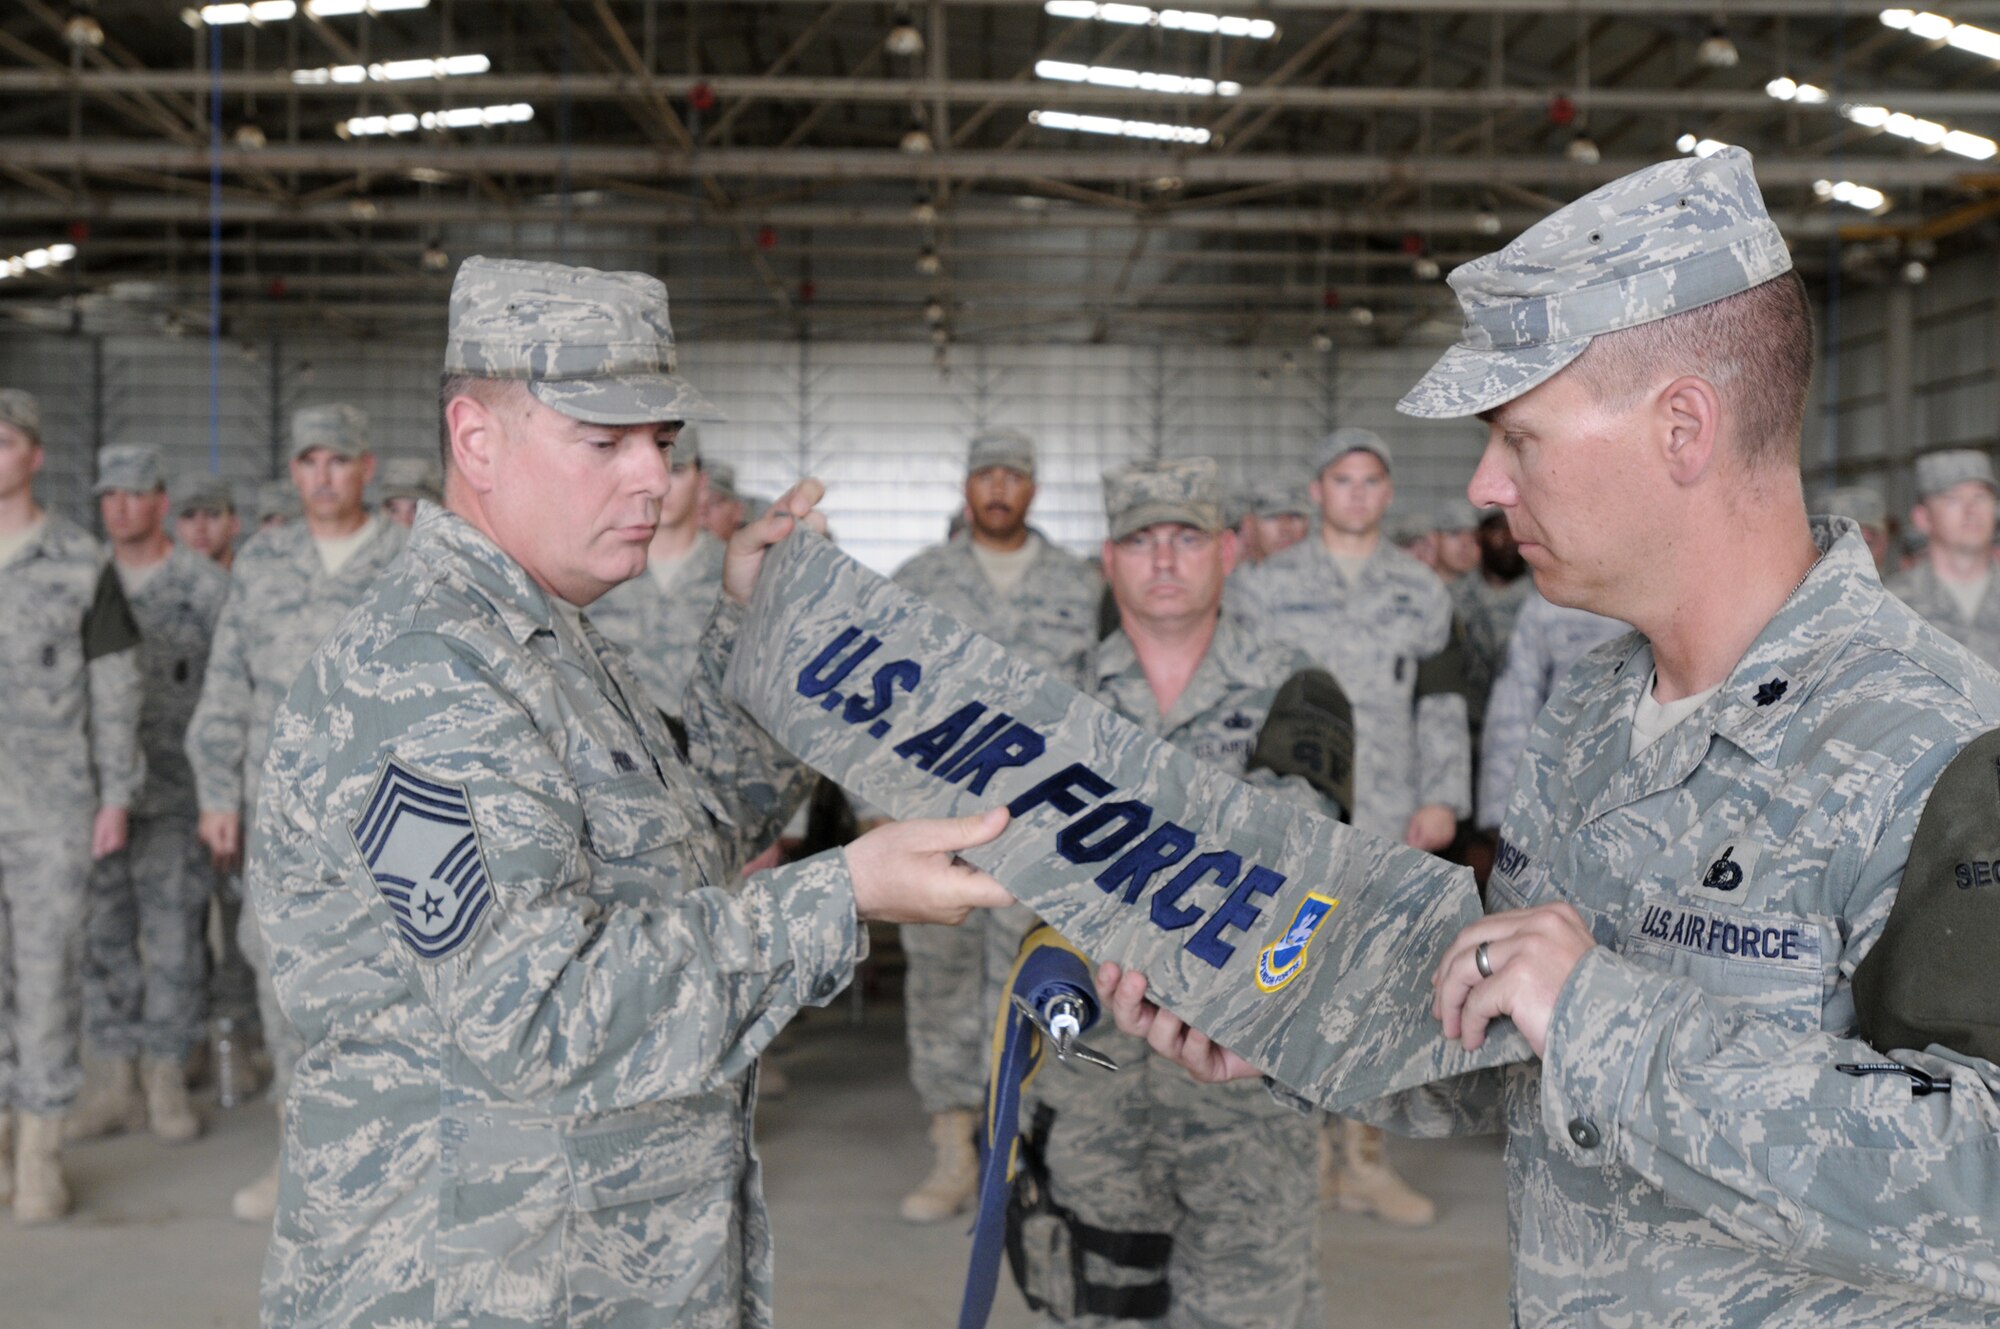 Chief Master Sgt. David Provo and Lt. Col. Theodore Ruminsky case the 506th ESFS squadron guidon for the final time during a transfer of authority ceremony May 28, 2010, at Kirkuk Regional Air Base, Iraq. Members of the 506th ESFS transferred base security to the Army 1st Special Troops Battalion. In addition to the transfer of authority, the 506th ESFS was officially inactivated. Chief Provo is the 506th Expeditionary Security Forces Squadron chief enlisted manager. Colonel Ruminsky is the 506th ESFS commander. (U.S. Air Force photo)